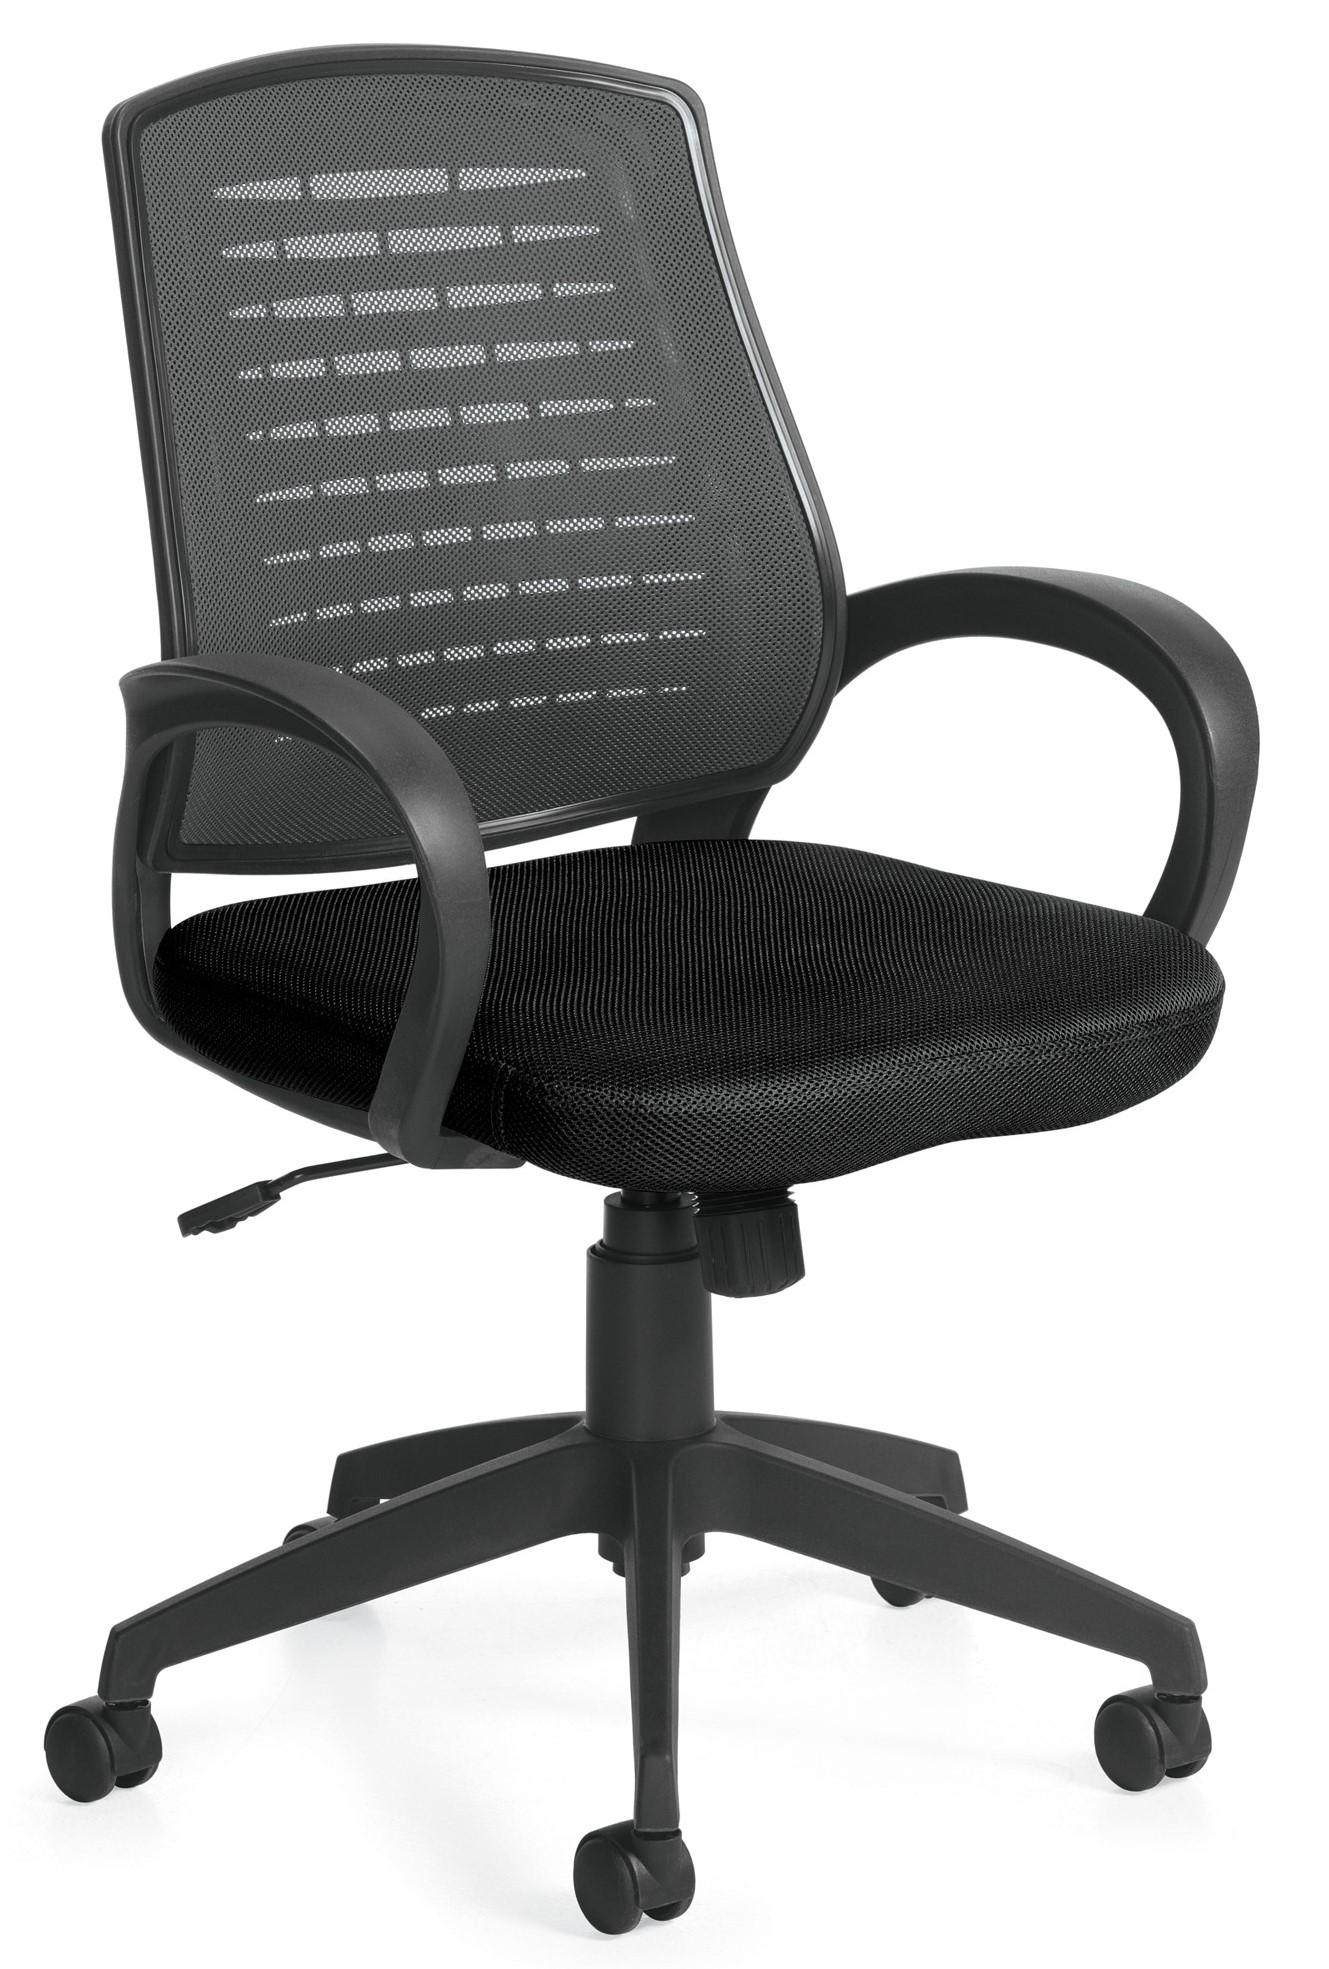 Medium back black swivel-tilt conference chair with mesh/contoured plastic back, fabric seat, plastic loop arms and nylon 5-star base.